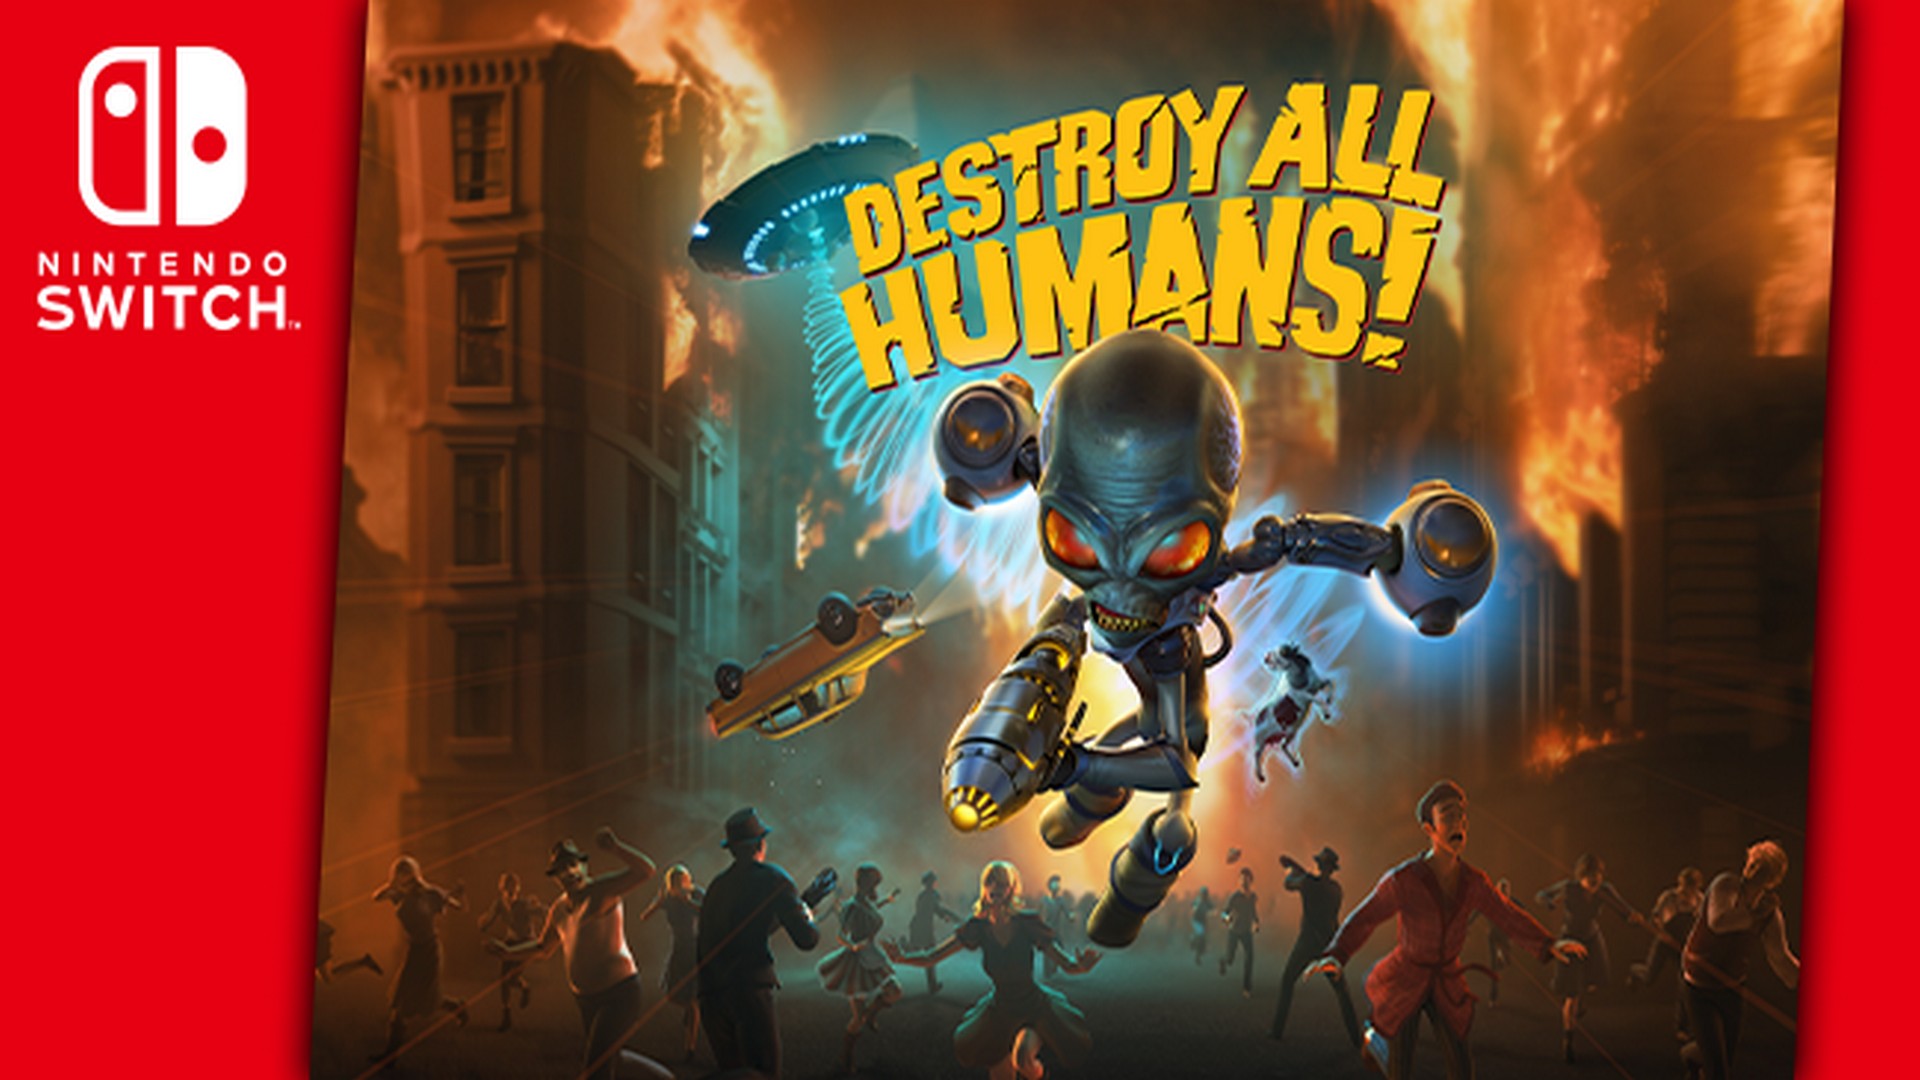 Handheld Anal Probing Now Possible: Destroy All Humans! Is Coming To Nintendo Switch On June 29th, 2021